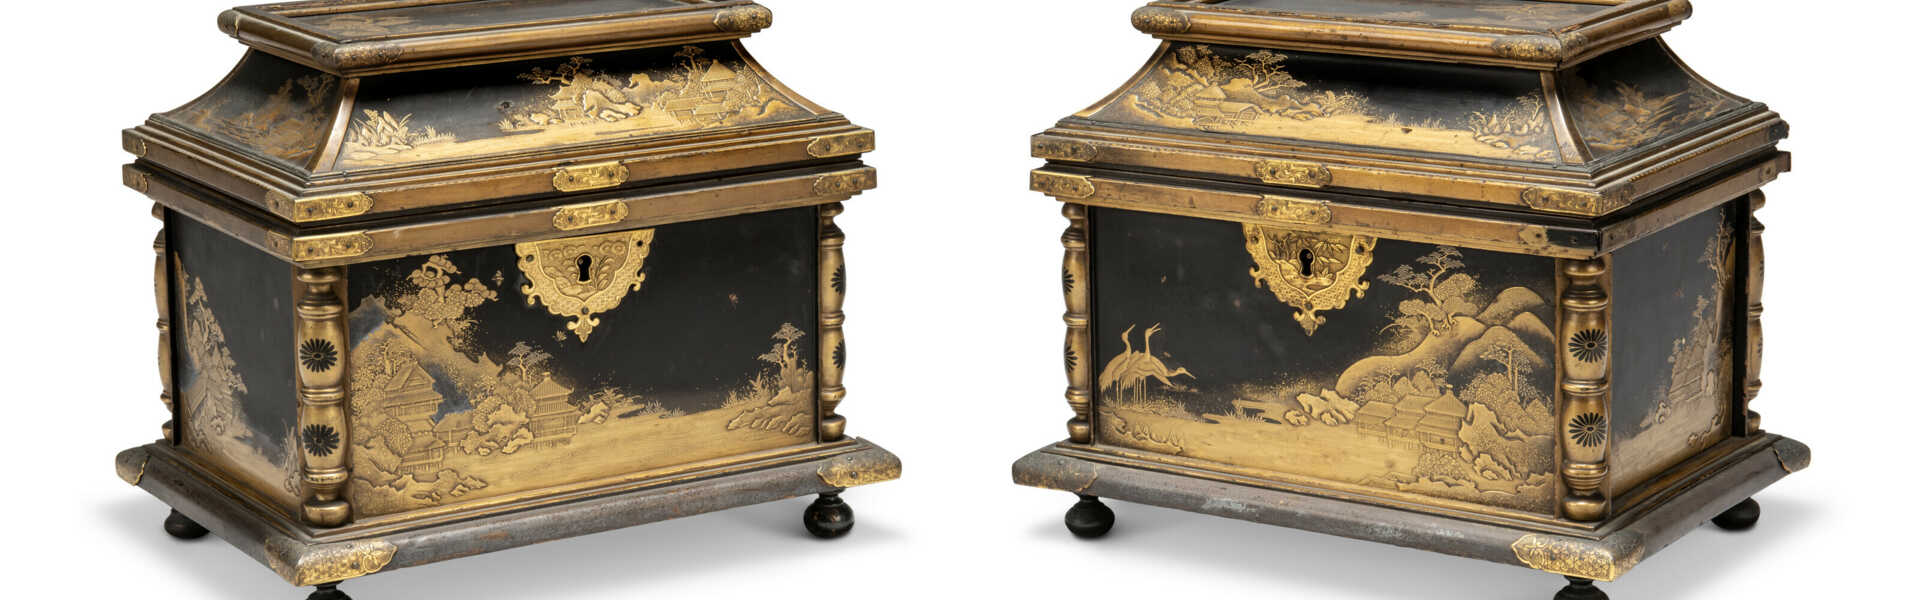 A PAIR OF JAPANESE PAGODA-FORM GILT-METAL-MOUNTED, BLACK AND GILT LACQUER TABLE CASKETS